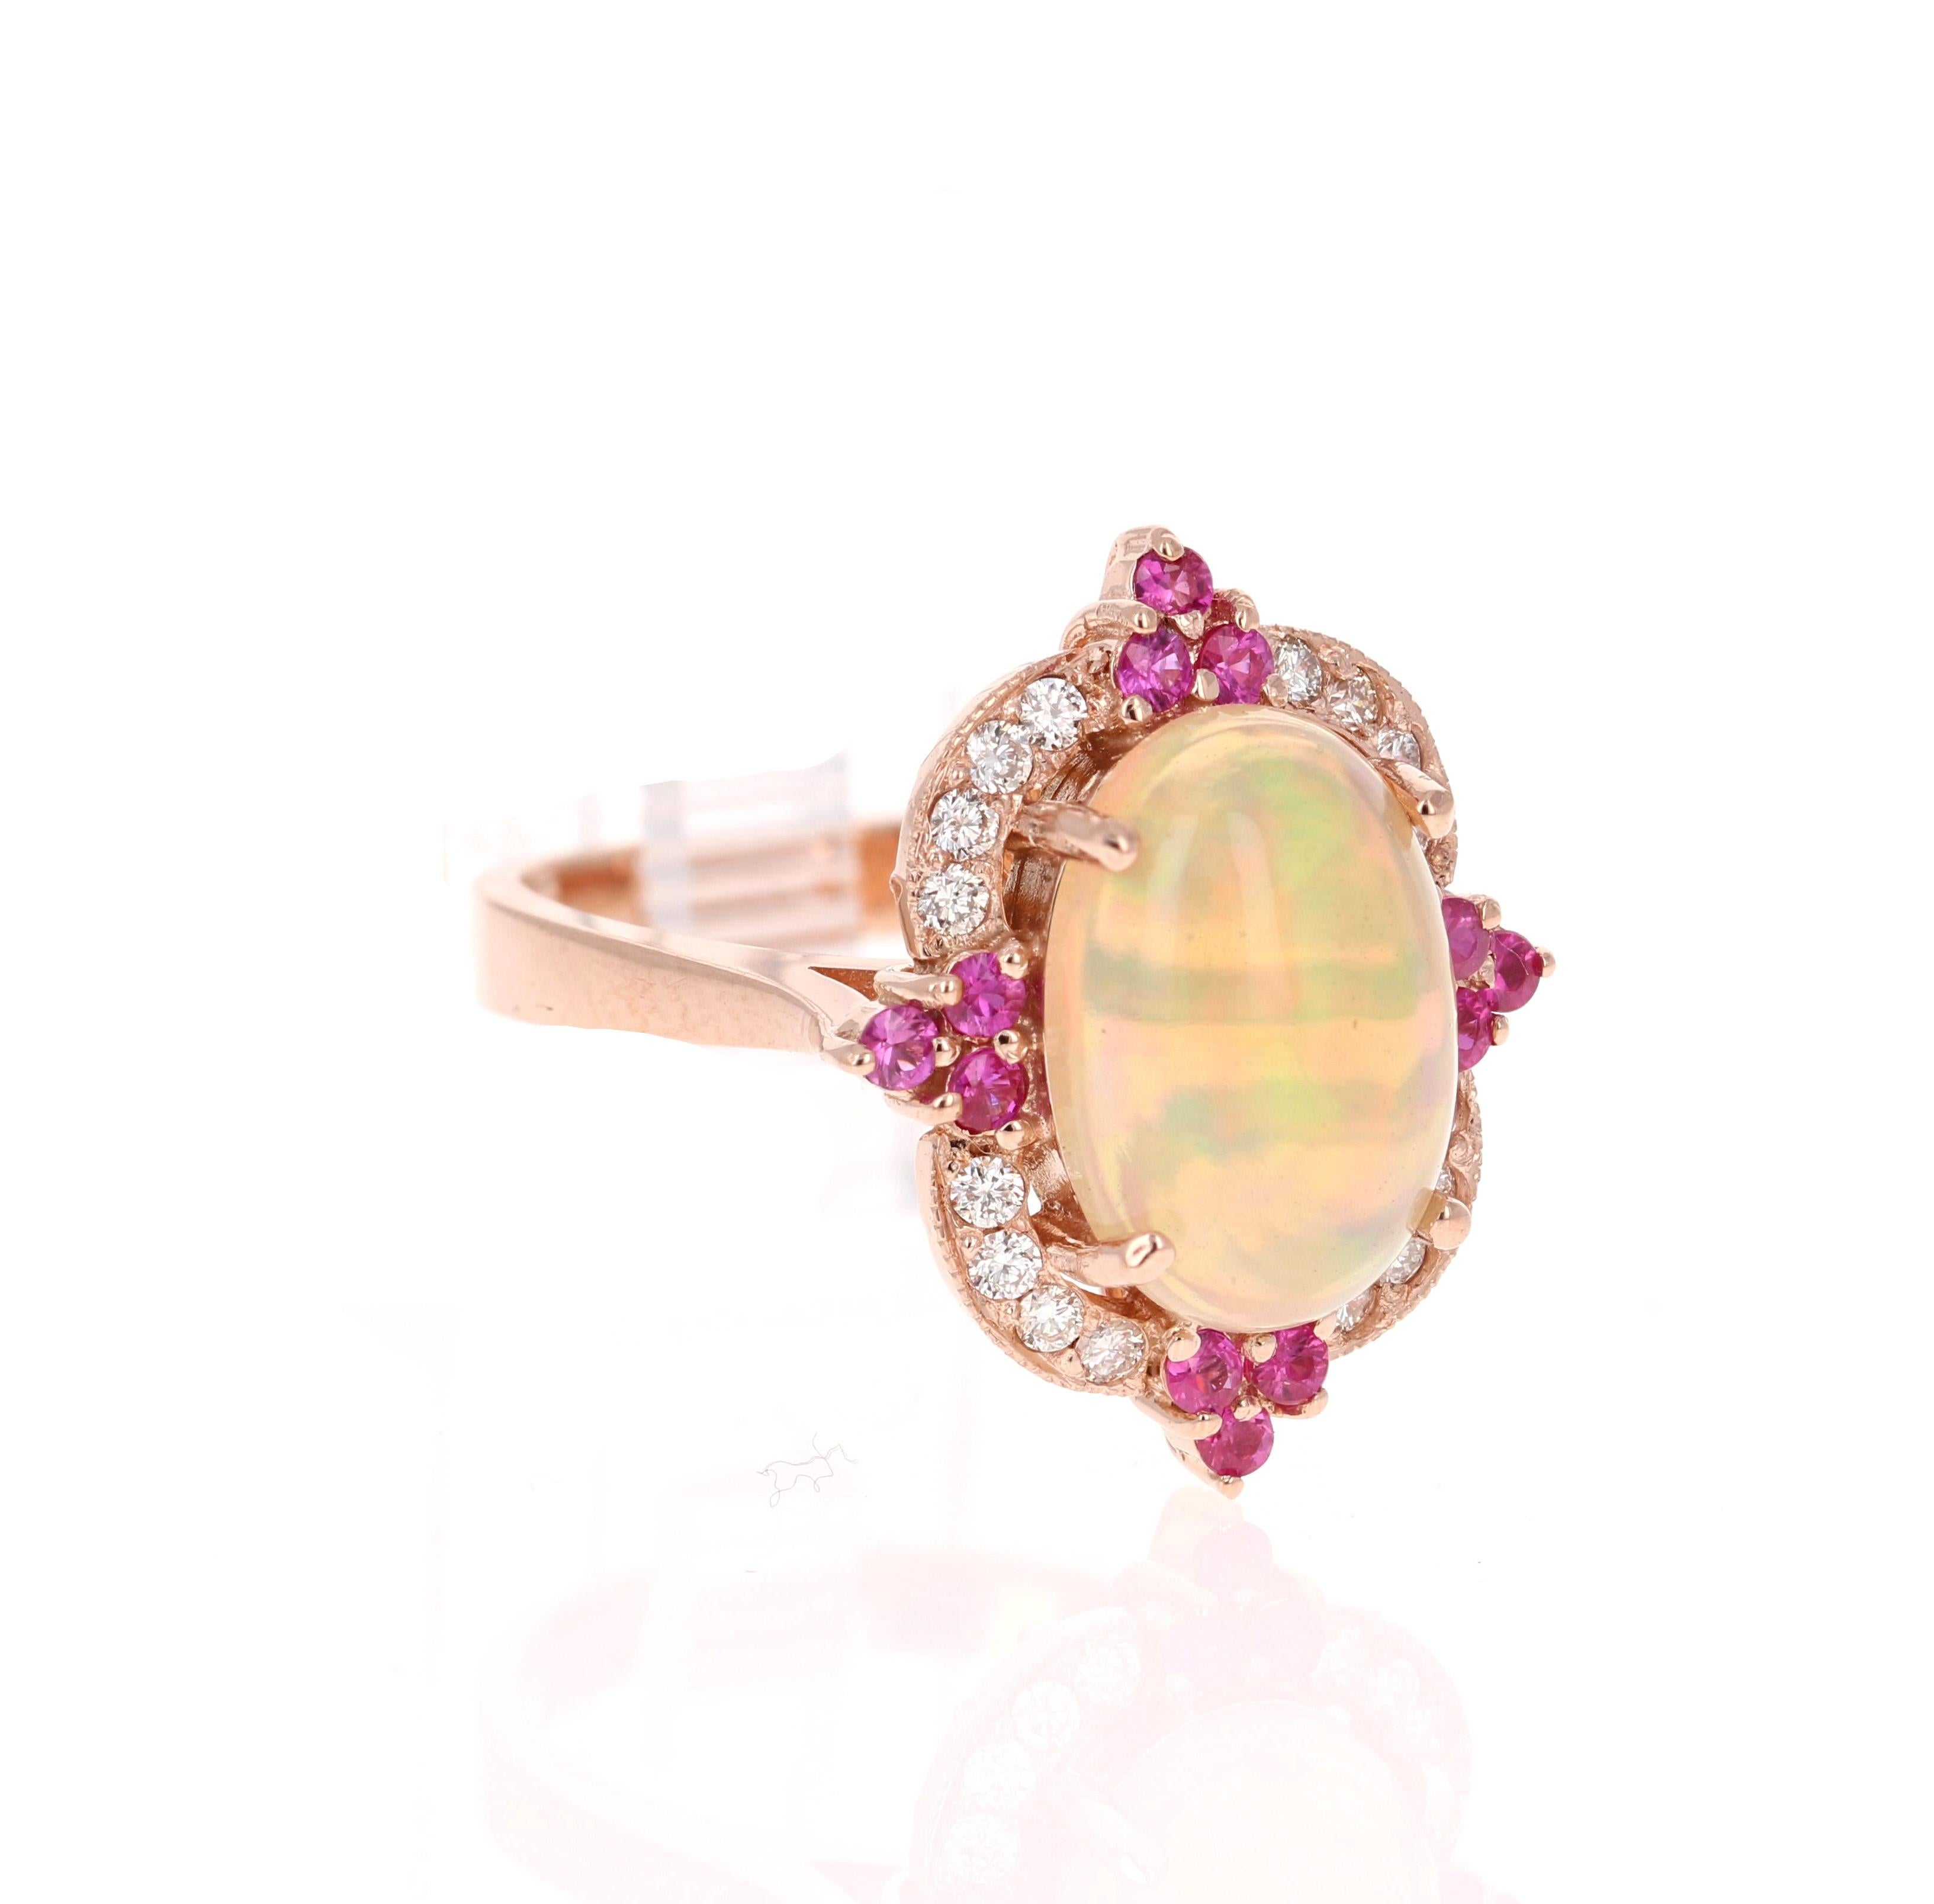 

Unique and beautifully designed ring that can be a masterpiece to anyone's jewelry collection

This ring has a 3.26 Carat Oval Cut Ethiopian- Origin Opal and is surrounded by 12 Pink Sapphires that weigh 0.38 Carats and is further embellished with